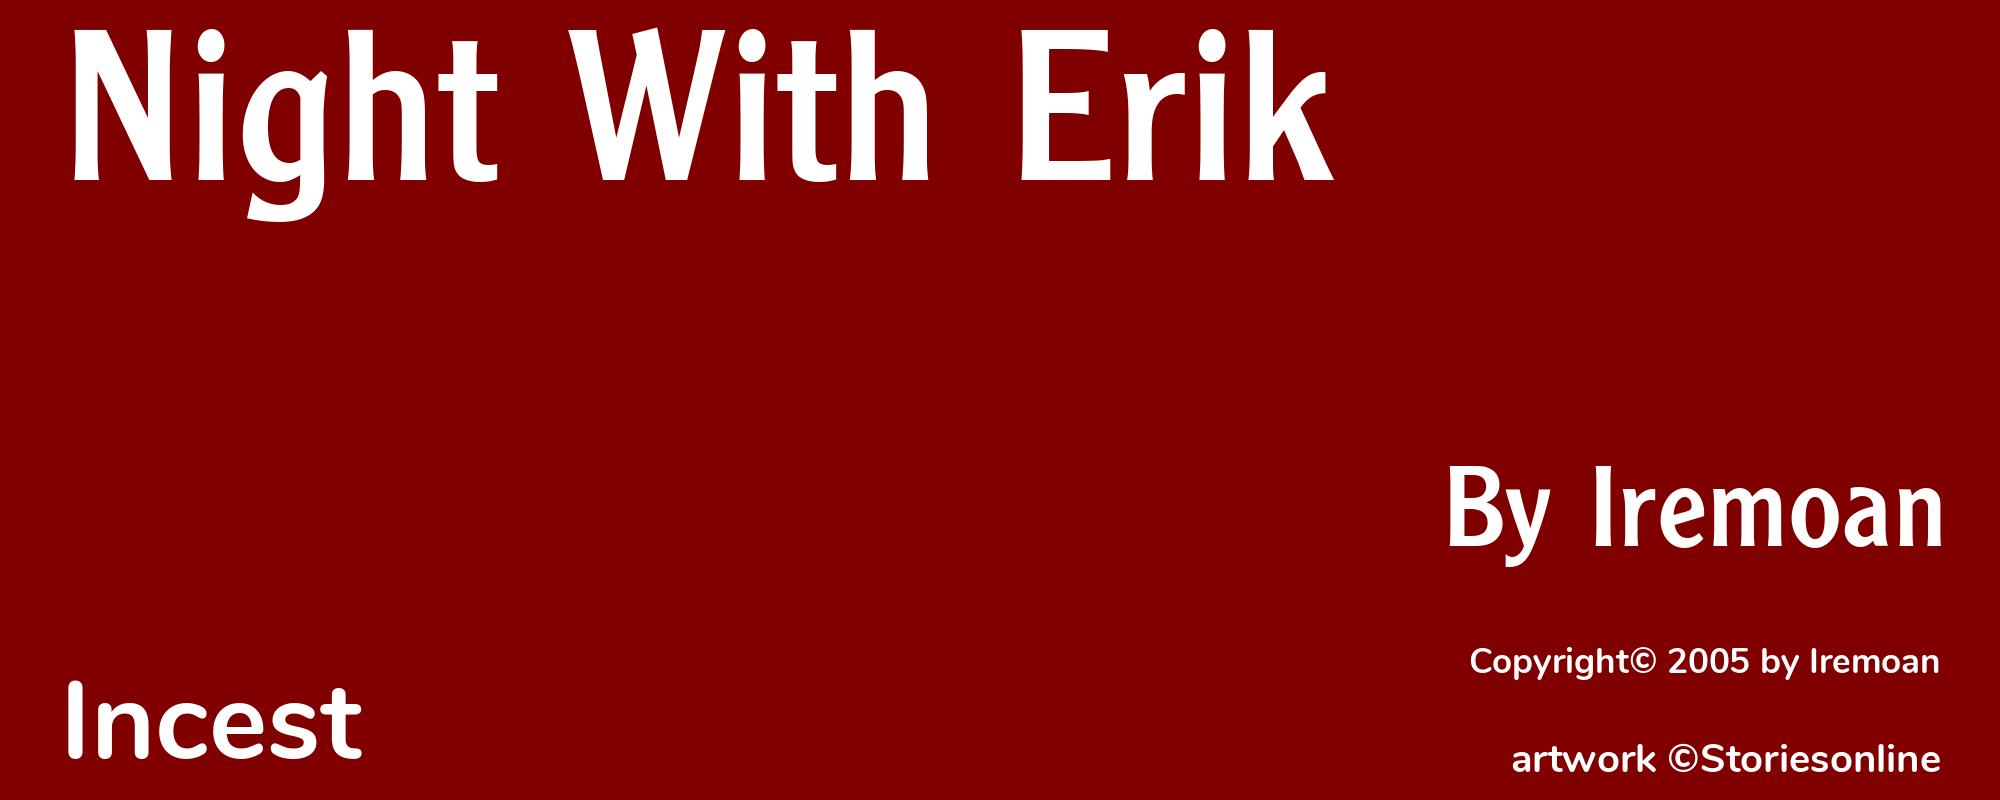 Night With Erik - Cover